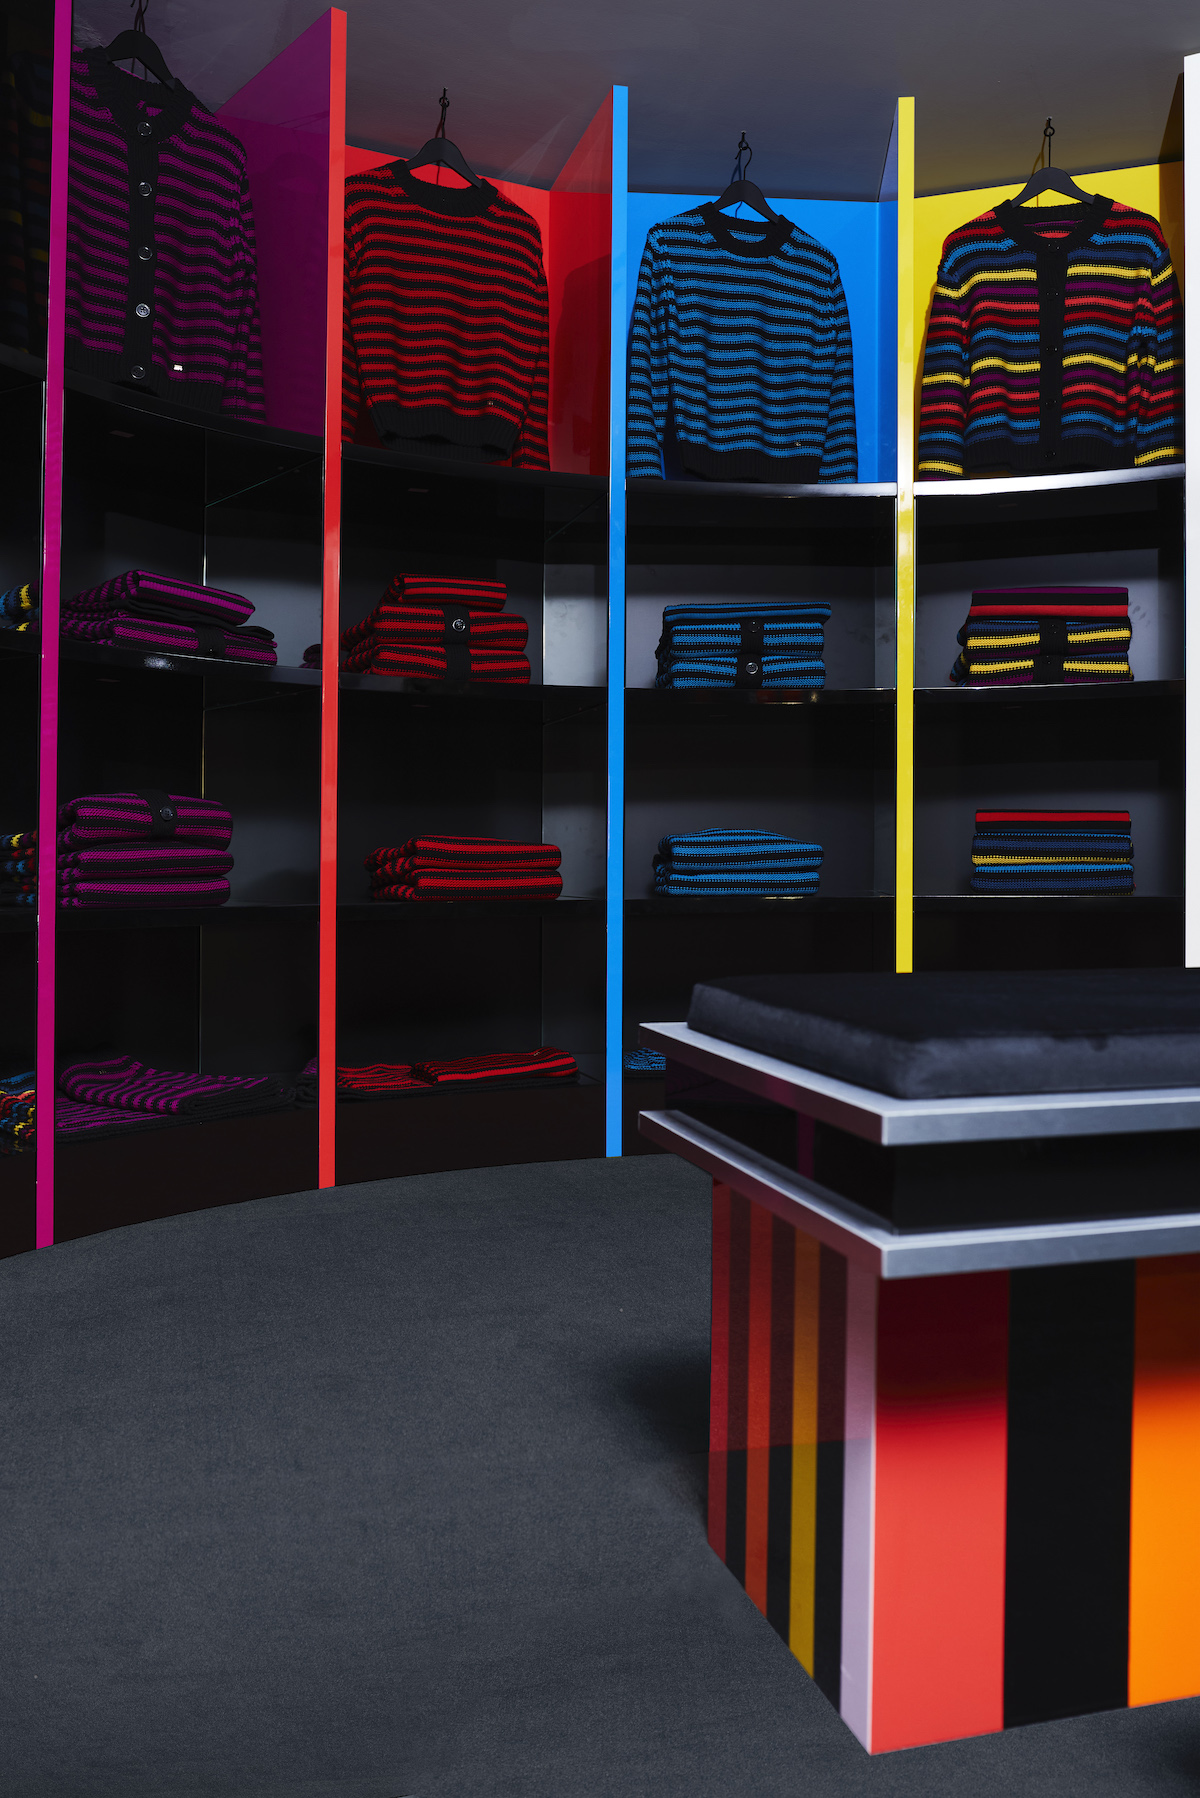 Clothes racks at Parisian fashion house Sonia Rykiel designed by Julien Sebban and Uchronia in Effect Magazine